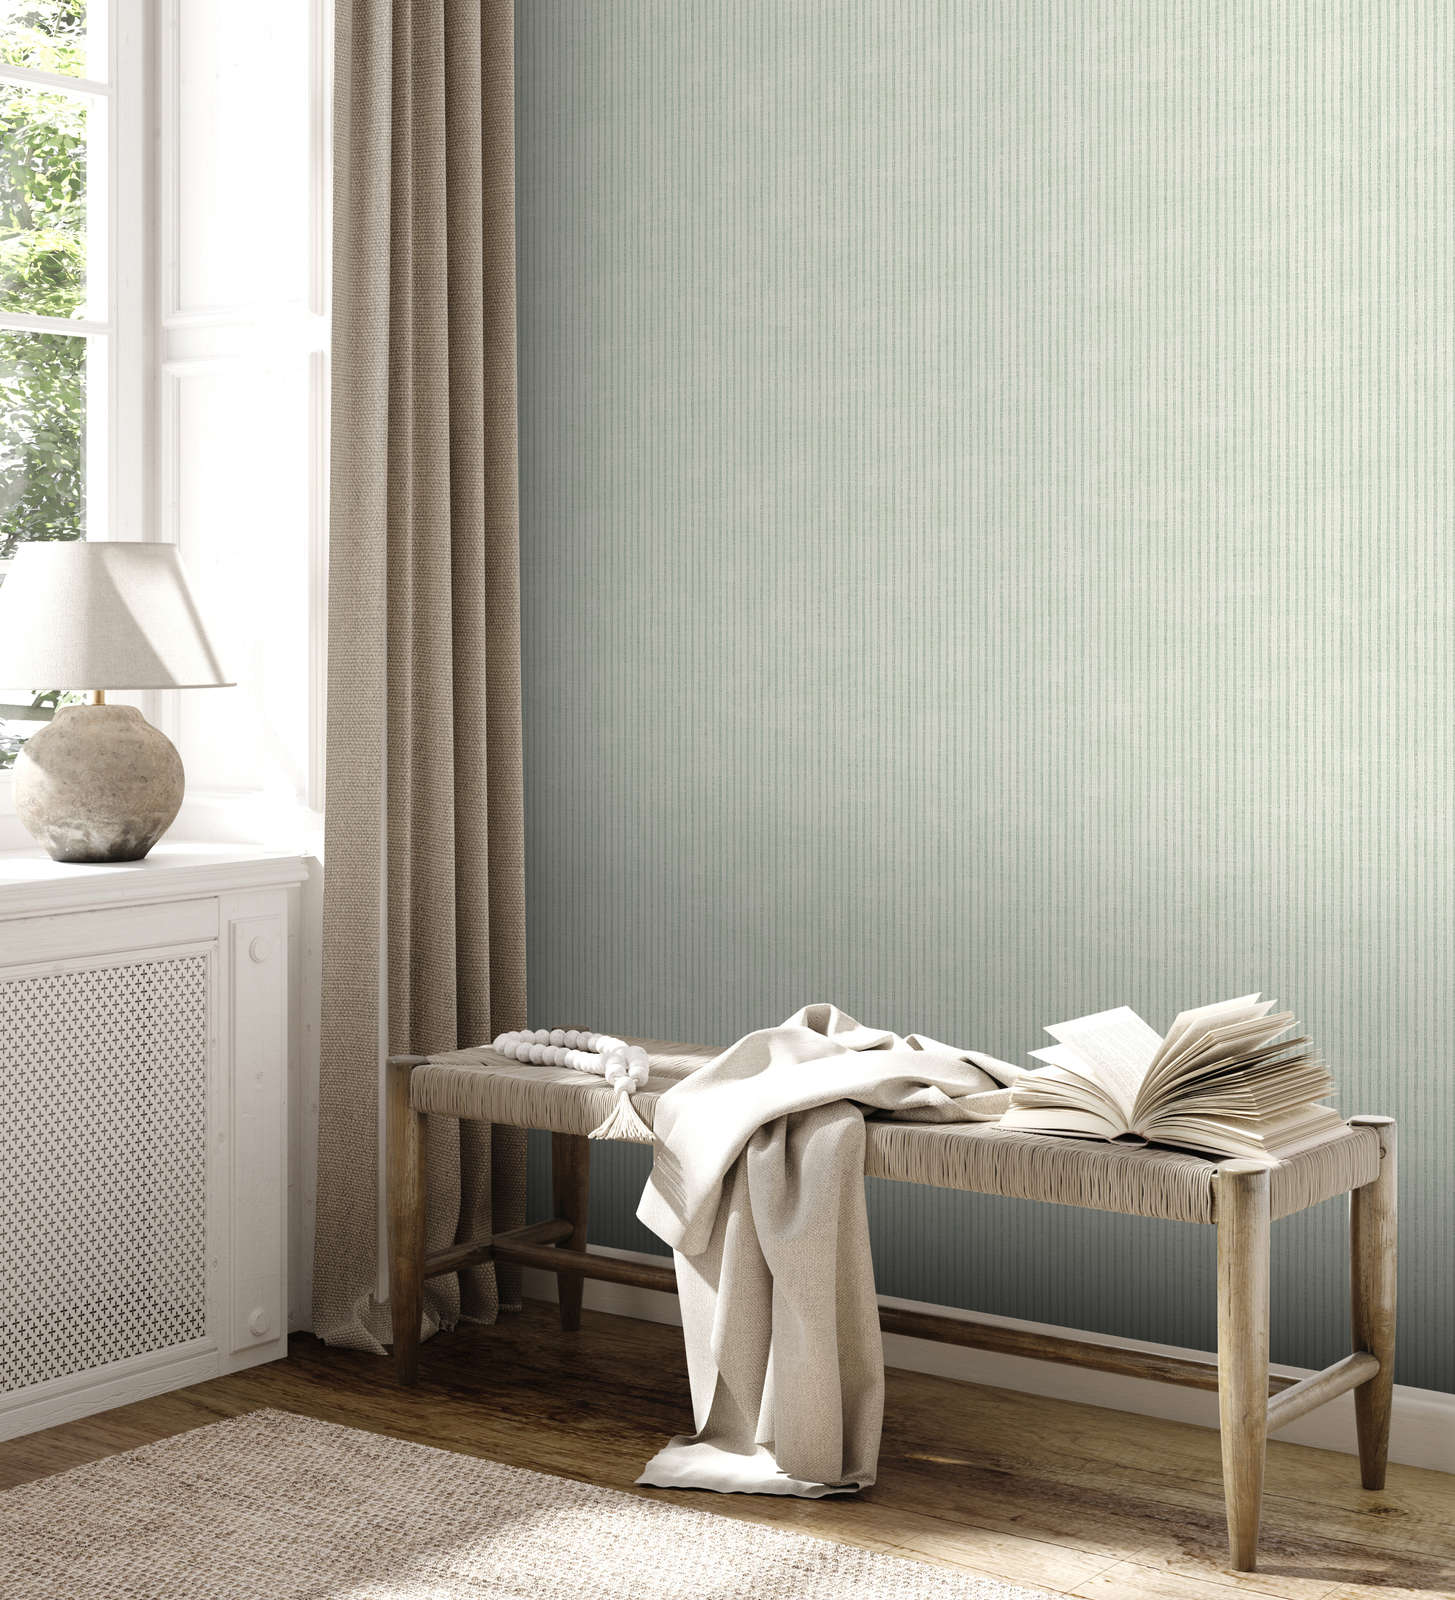             Country house striped wallpaper in vintage style - cream, green
        